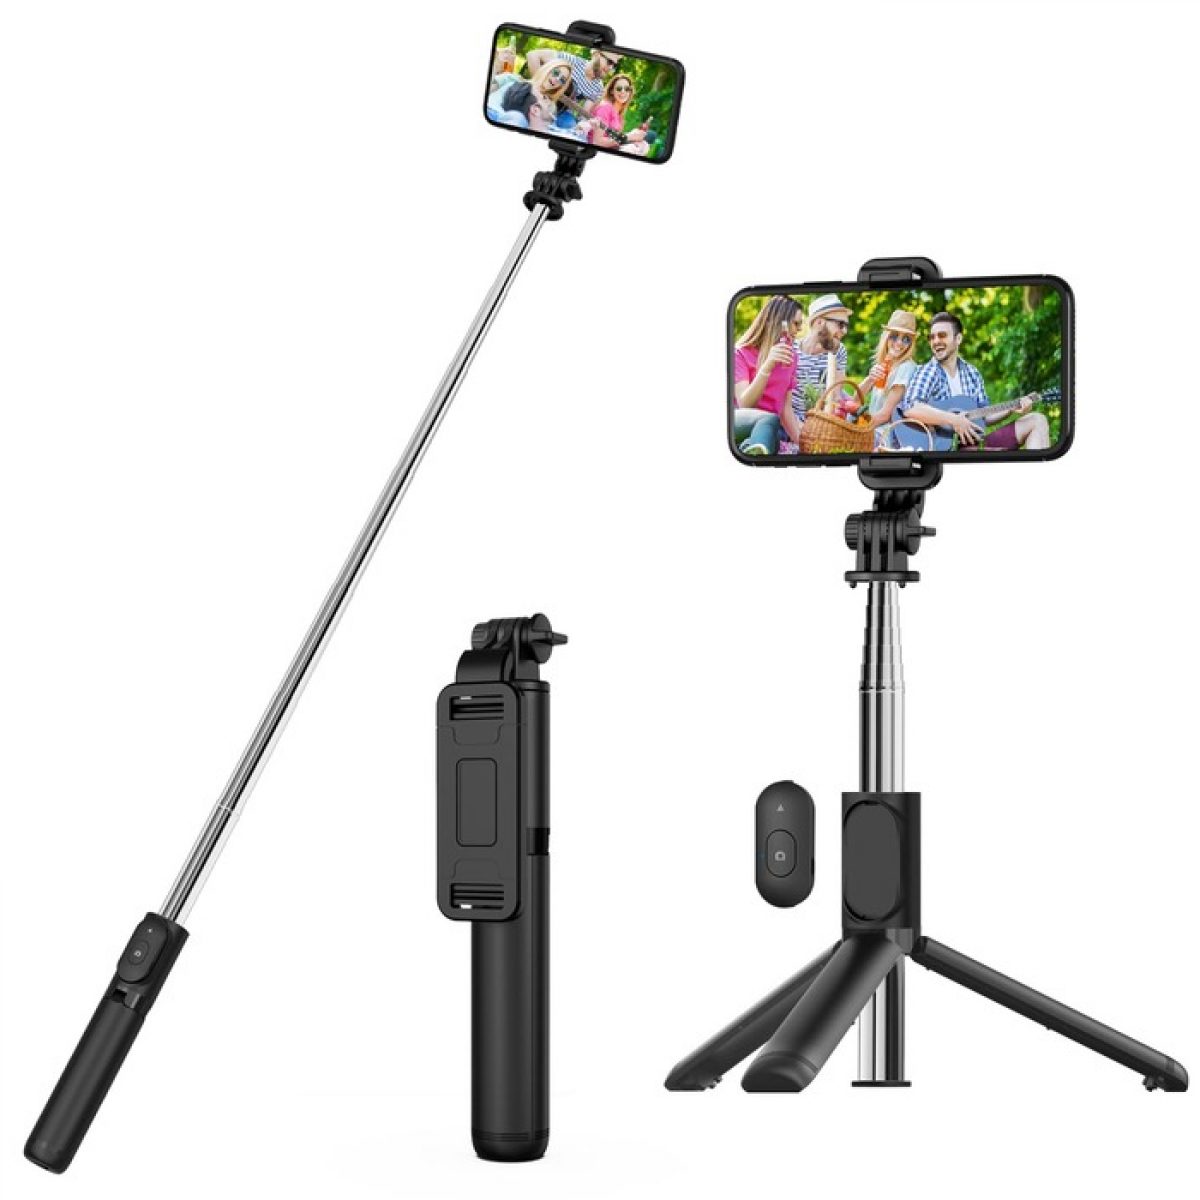 assembling-your-promark-monopod-selfie-stick-a-step-by-step-guide